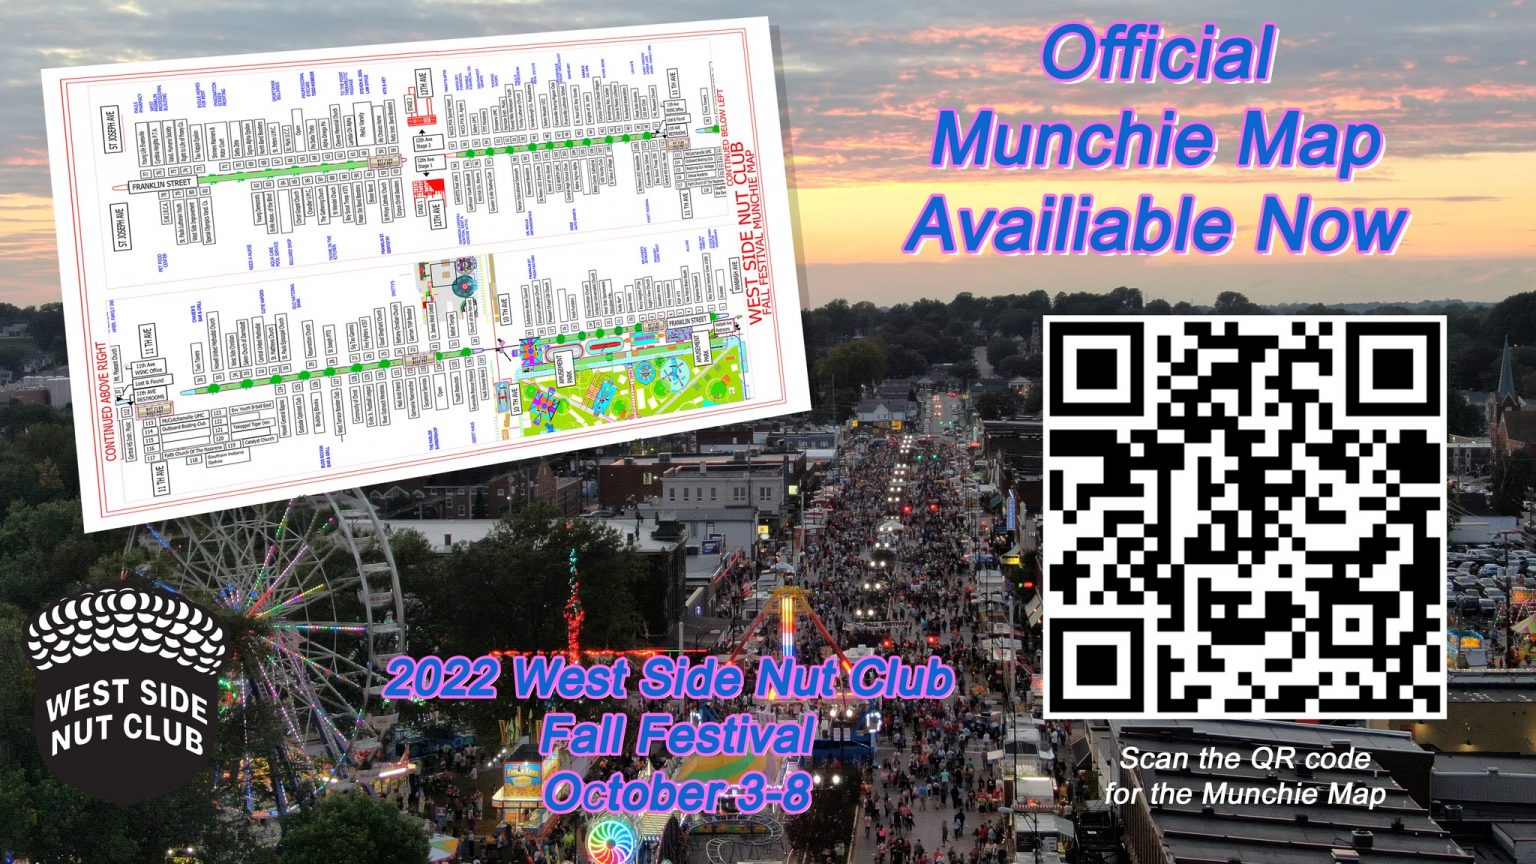 West Side Nut Club Fall Festival MUNCHIE MAP is out for 2022! HOT 96